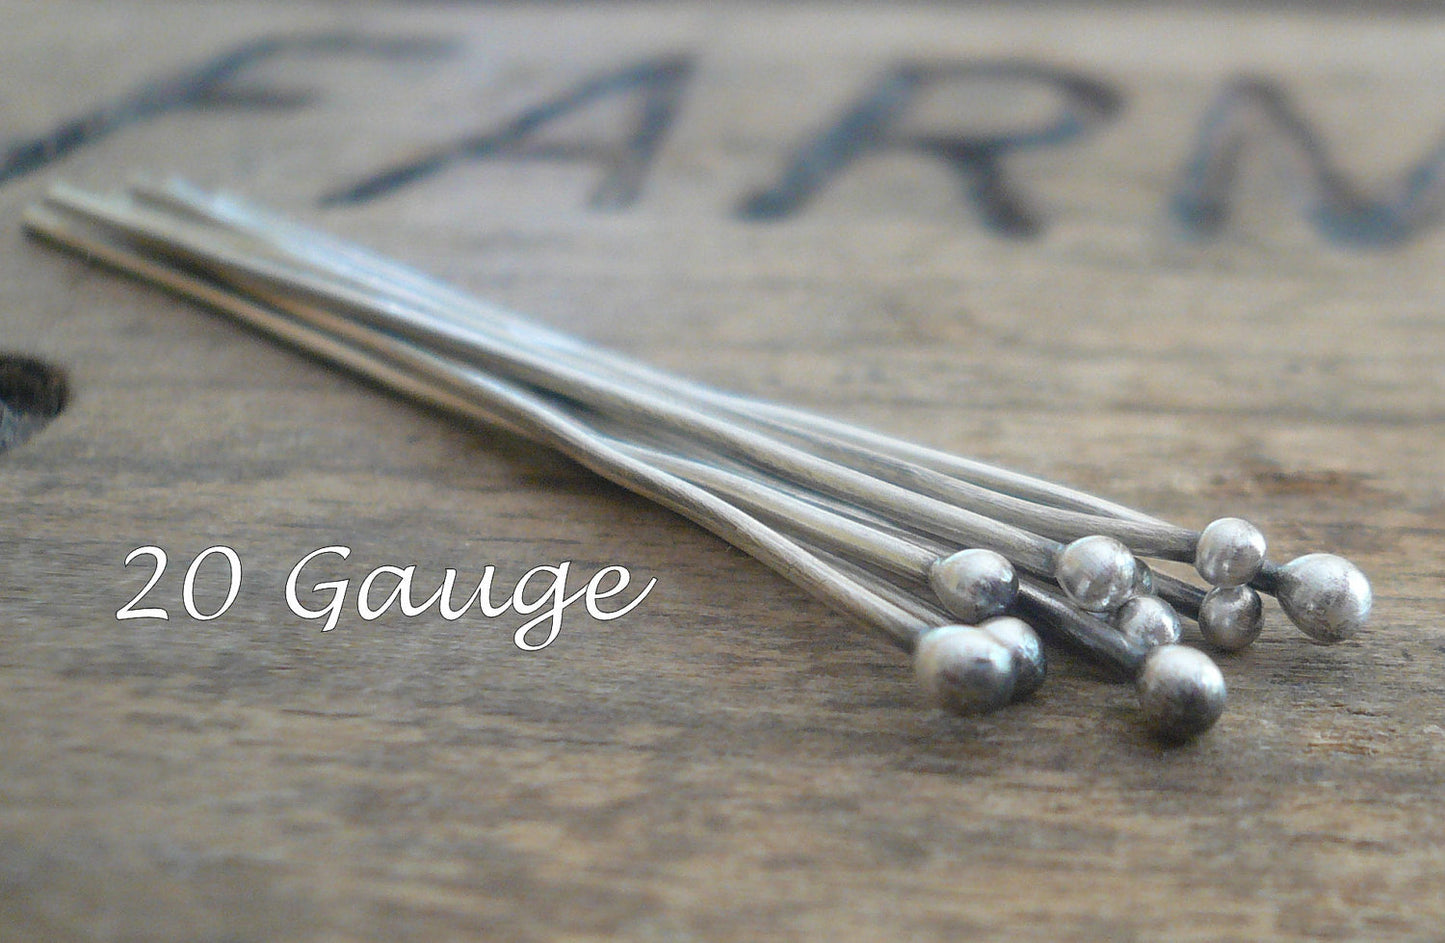 10 2" Fine Silver Handmade Ball Headpins - 20 gauge. 2 inches. Oxidized and polished